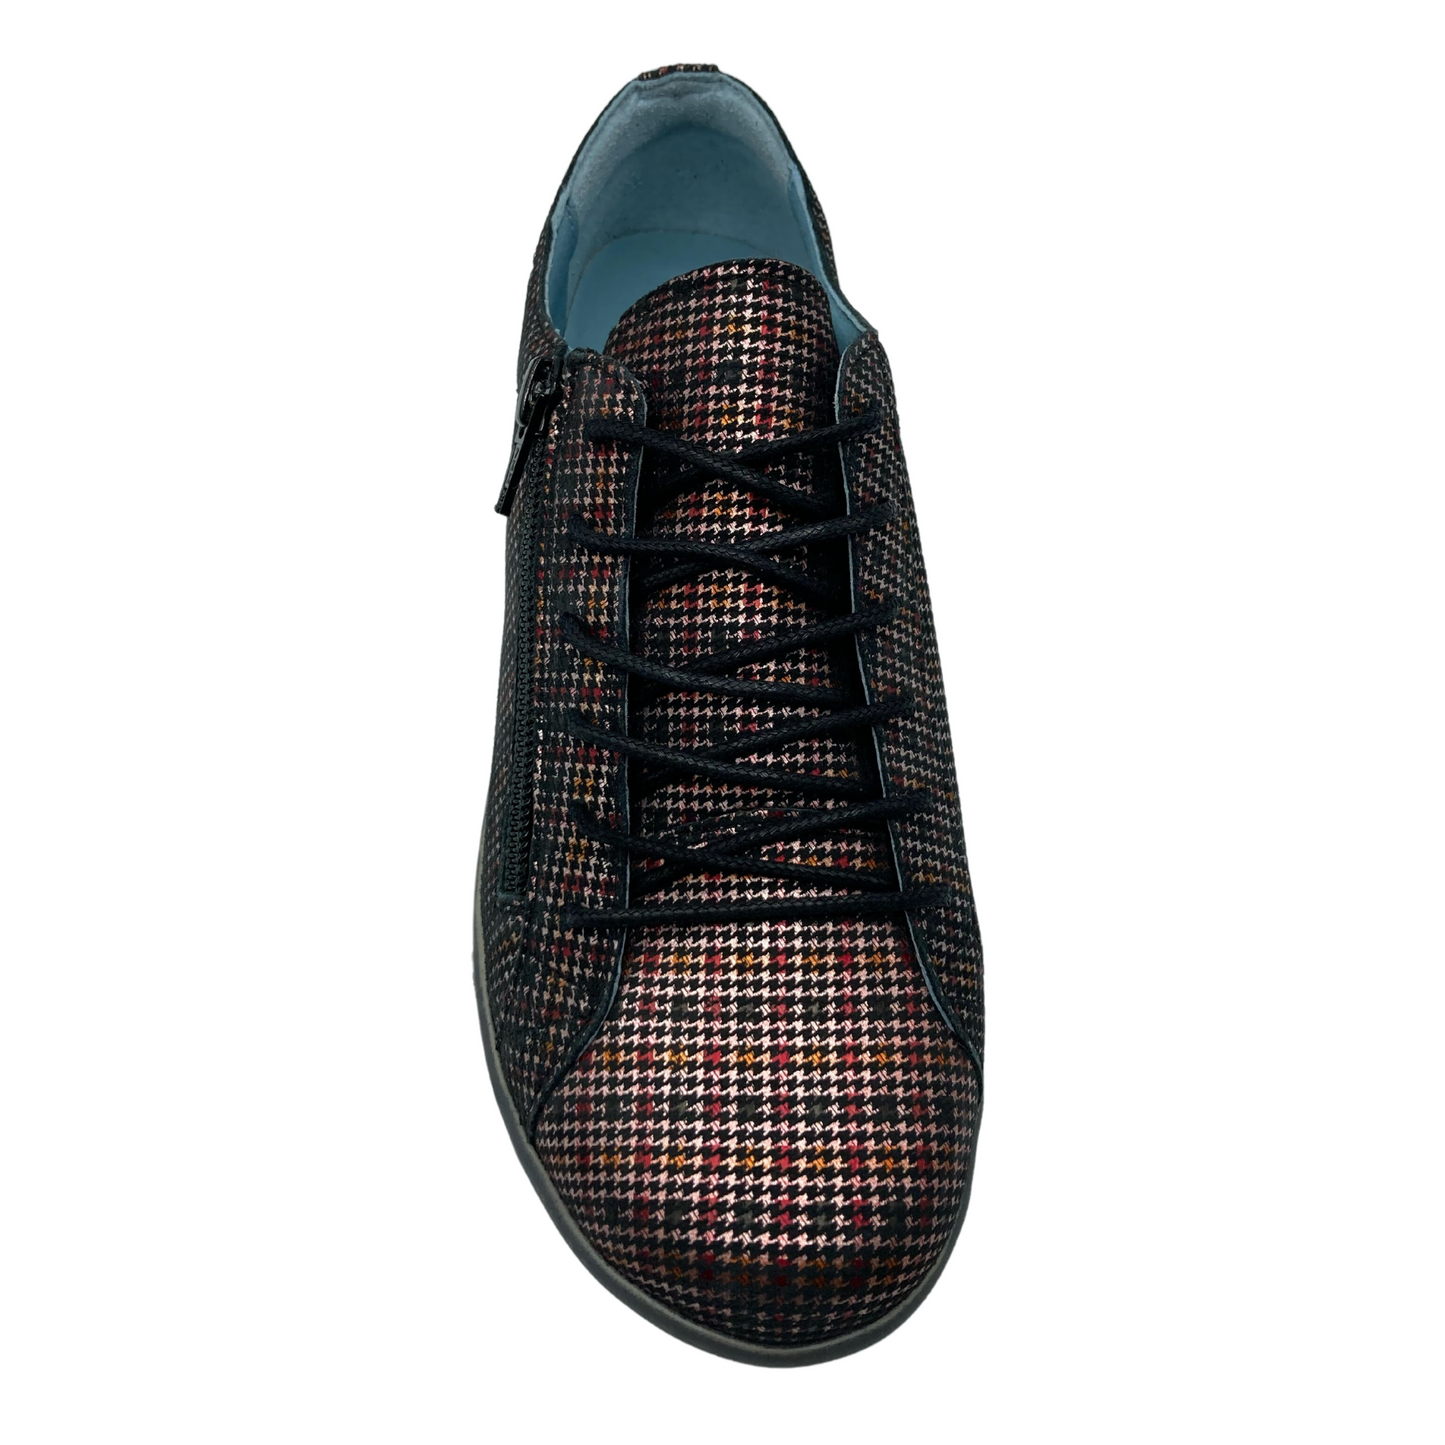 Top view of leather sneaker with black laces, rounded toe and blue lining